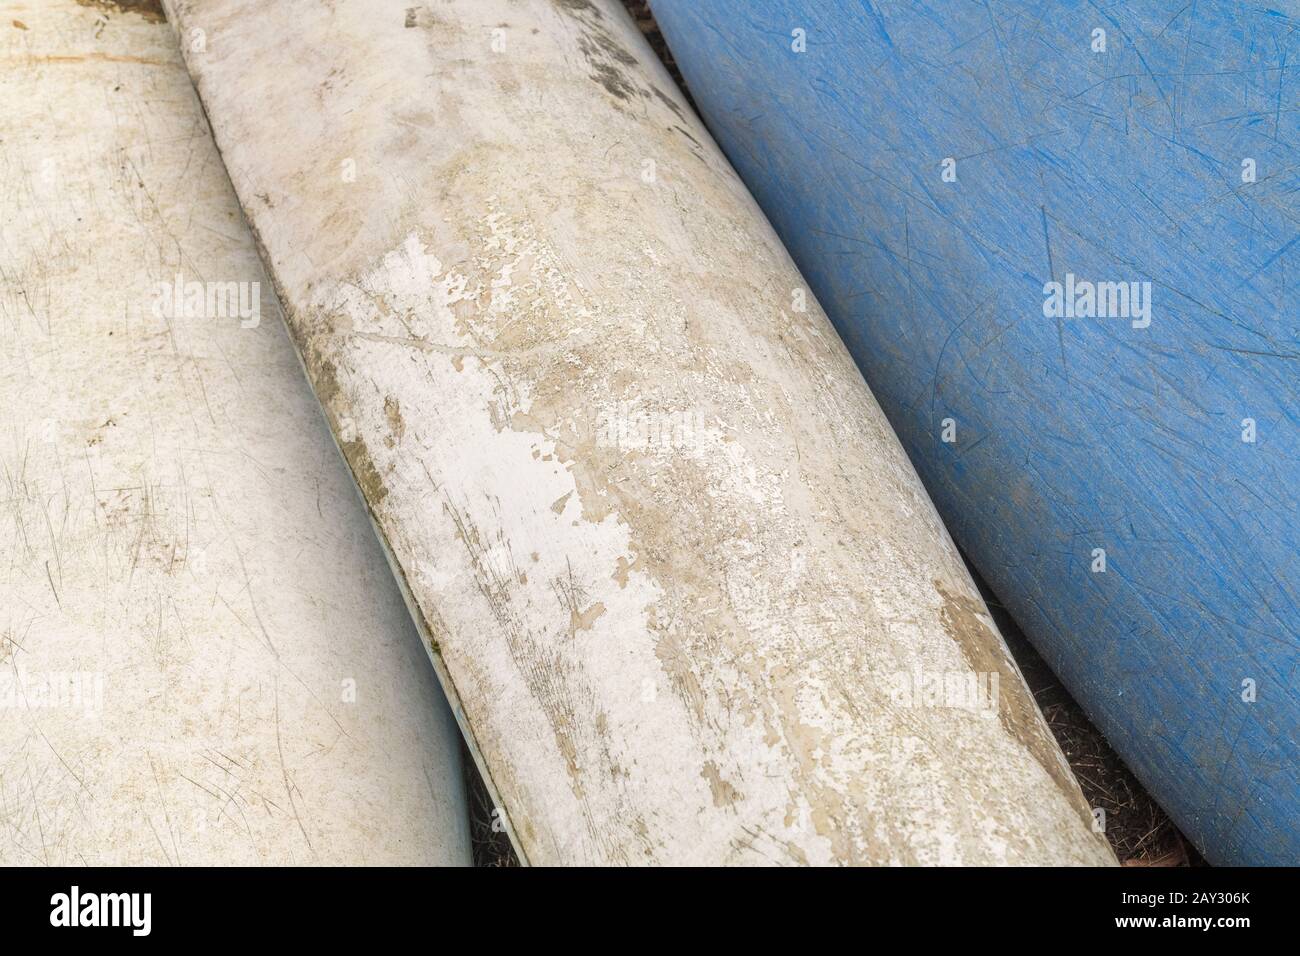 Three upturned fibreglass hulls of beached kayaks, showing glass fibre strands and glass fabric structure and texture. Stock Photo